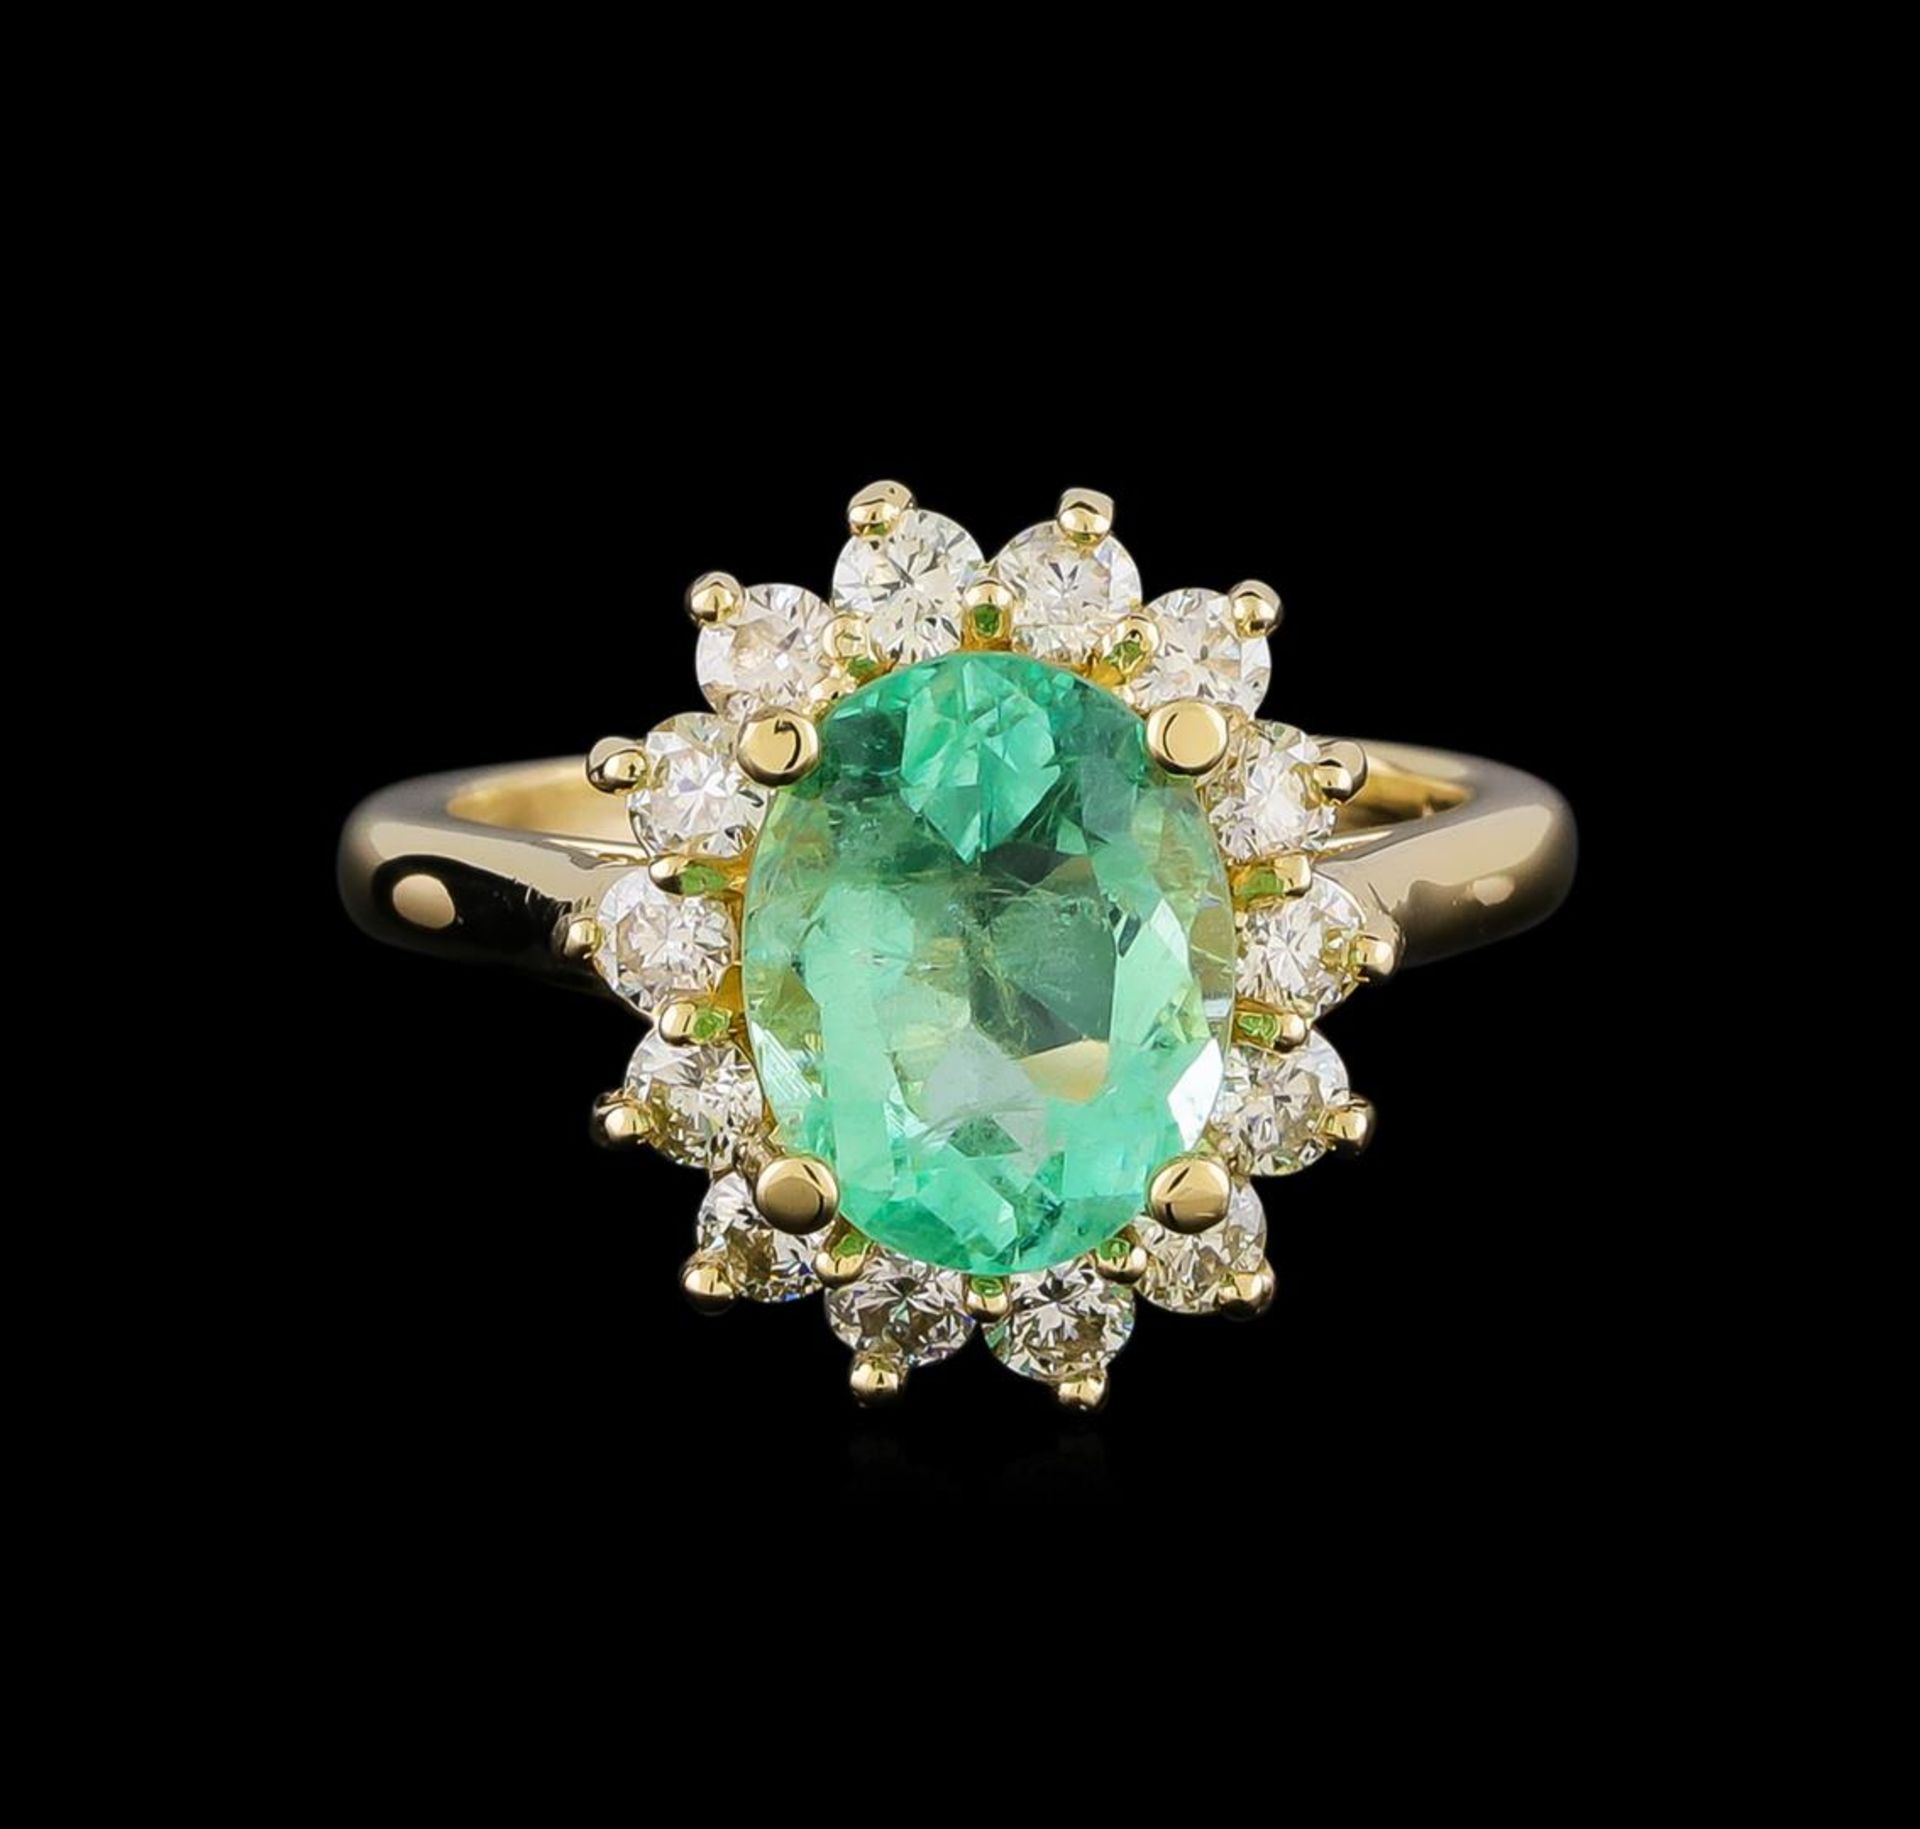 2.65 ctw Emerald and Diamond Ring - 14KT Yellow Gold - Image 2 of 5